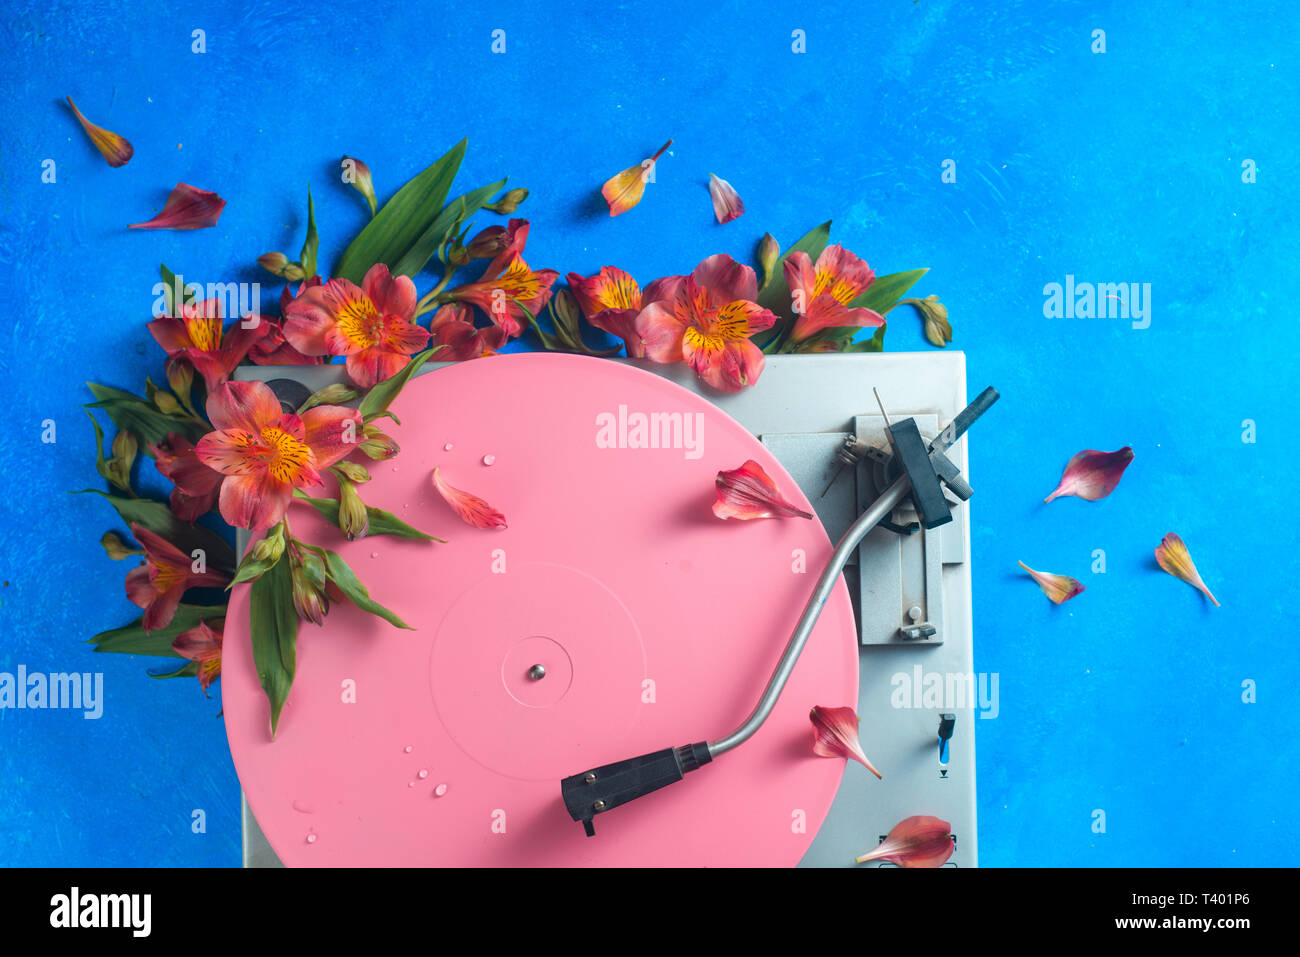 Pink color block flat lay with colorful vinyl record player and flowers. Spring music still life concept on a blue background with copy space Stock Photo